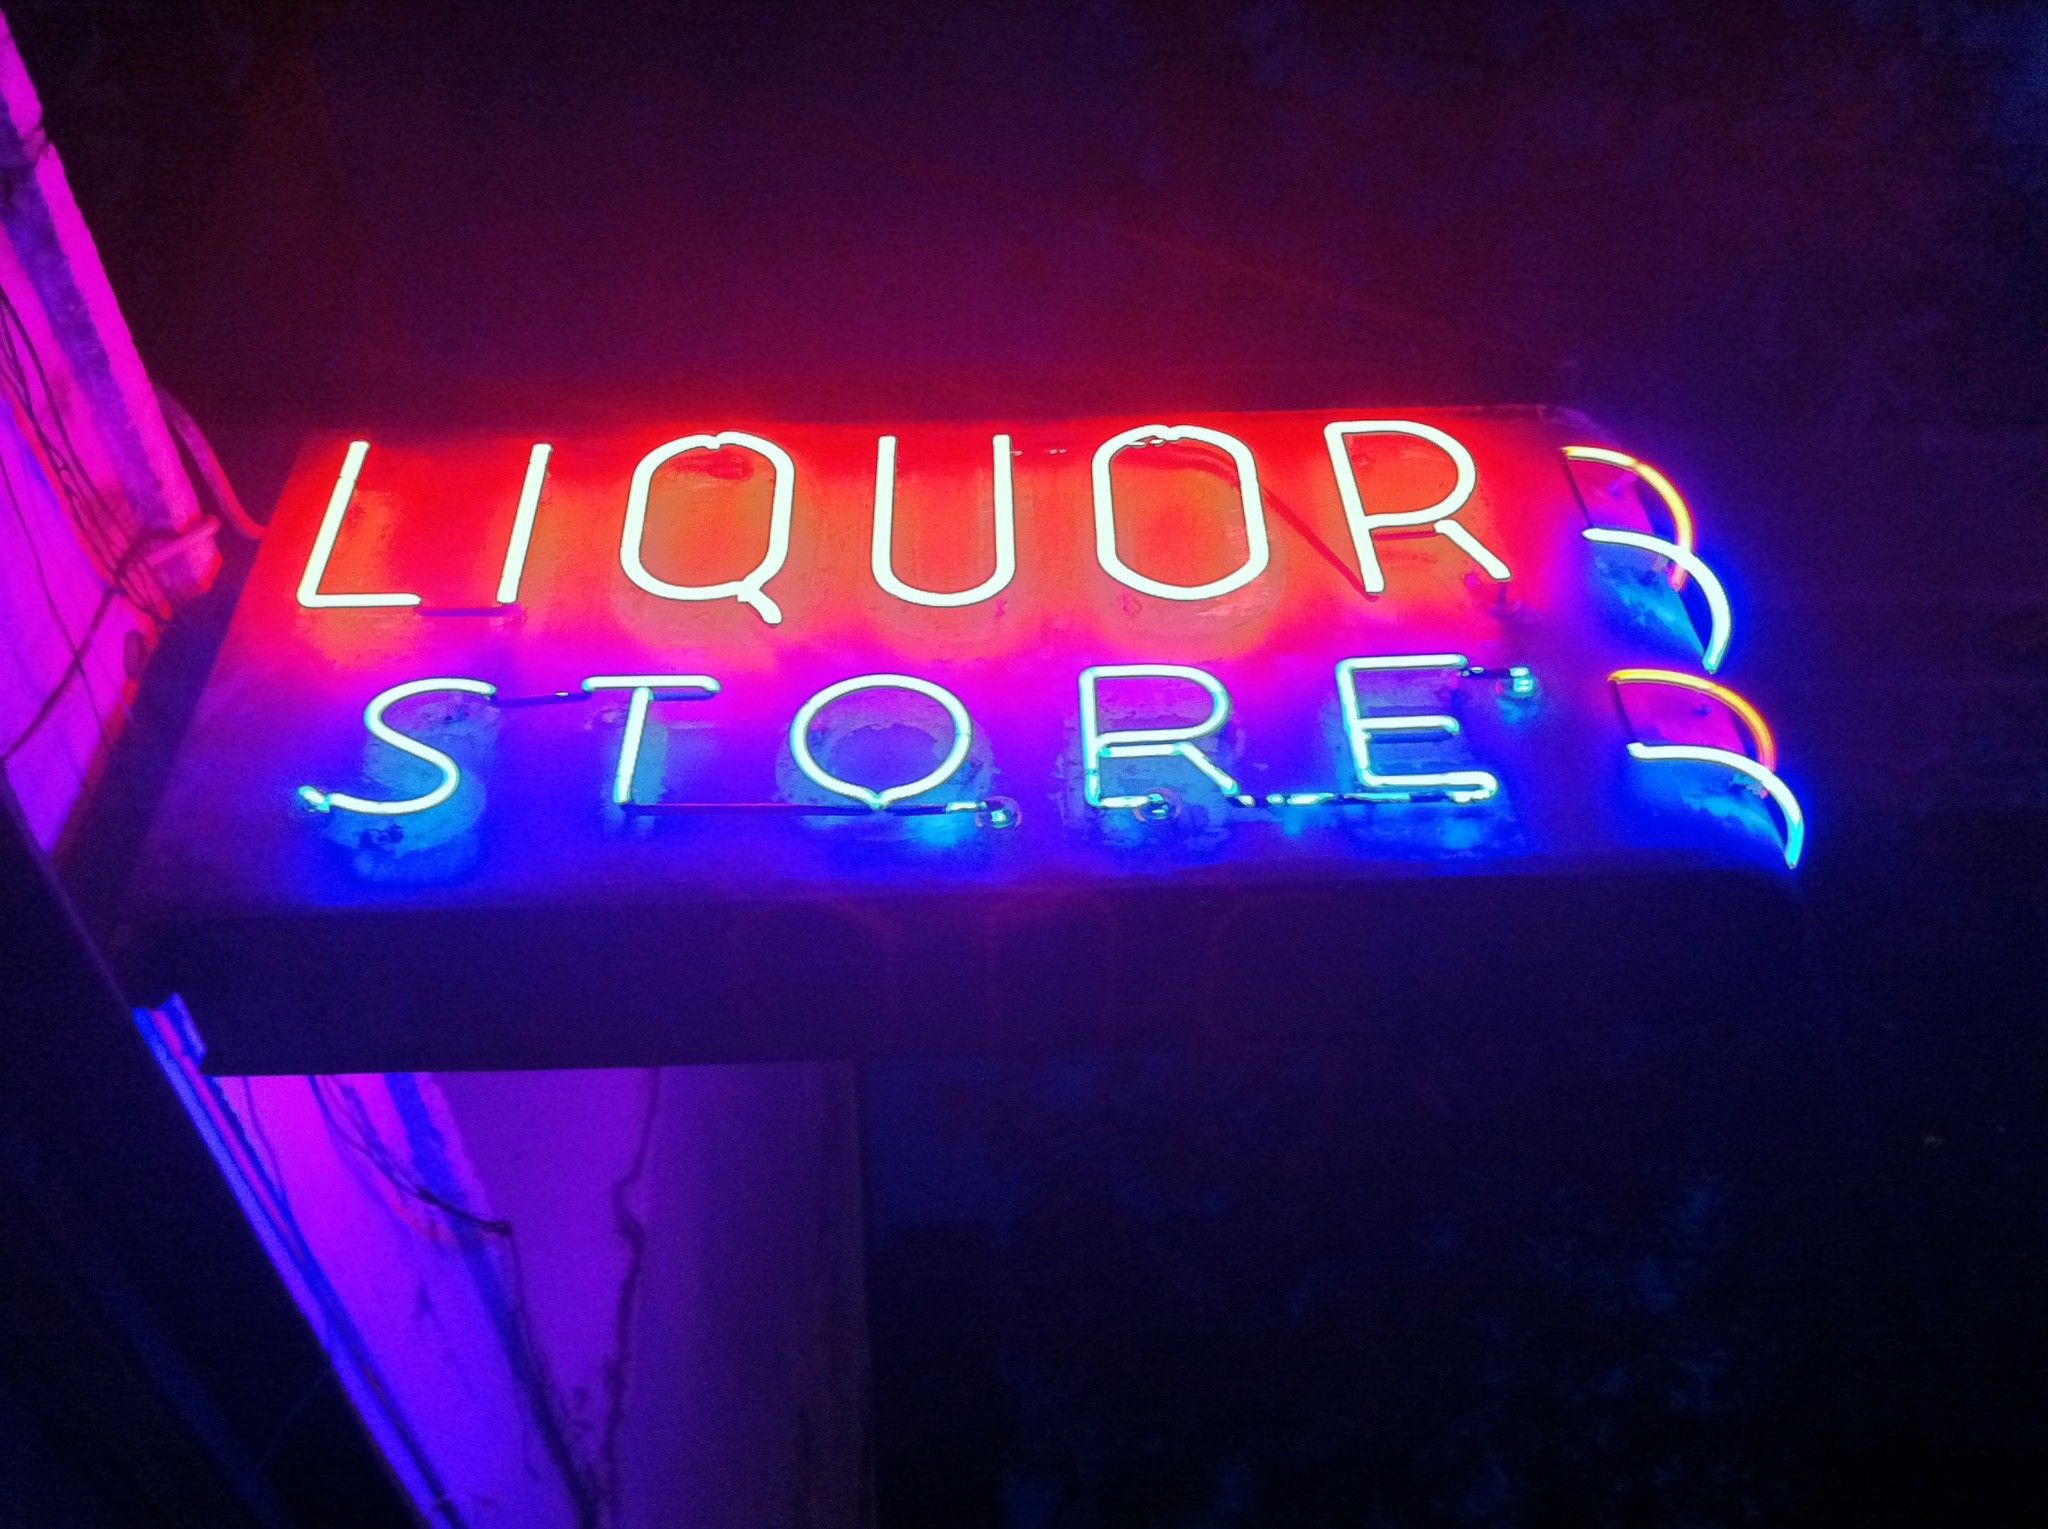 Main Photo: Liquor store with Property - Confidential Listing: Business with Property for sale